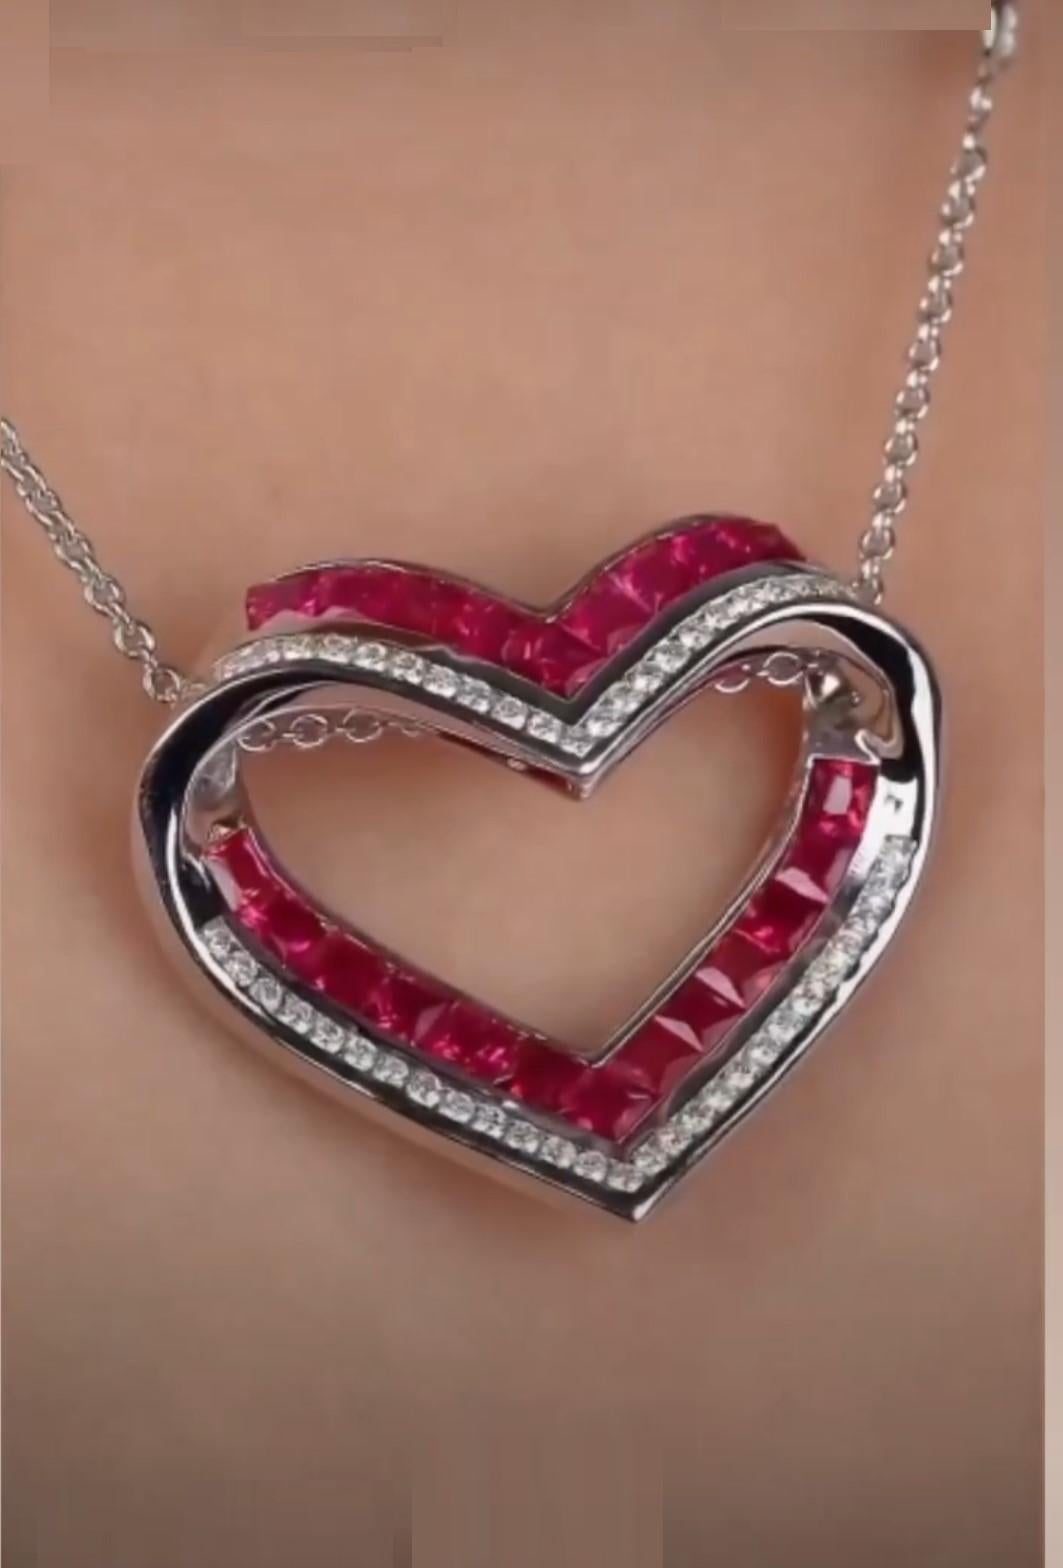 Emerald Cut NWT 18KT Gold $9, 600 Glittering Fancy 3.5CT Ruby Diamond Pendant Heart Necklace For Sale